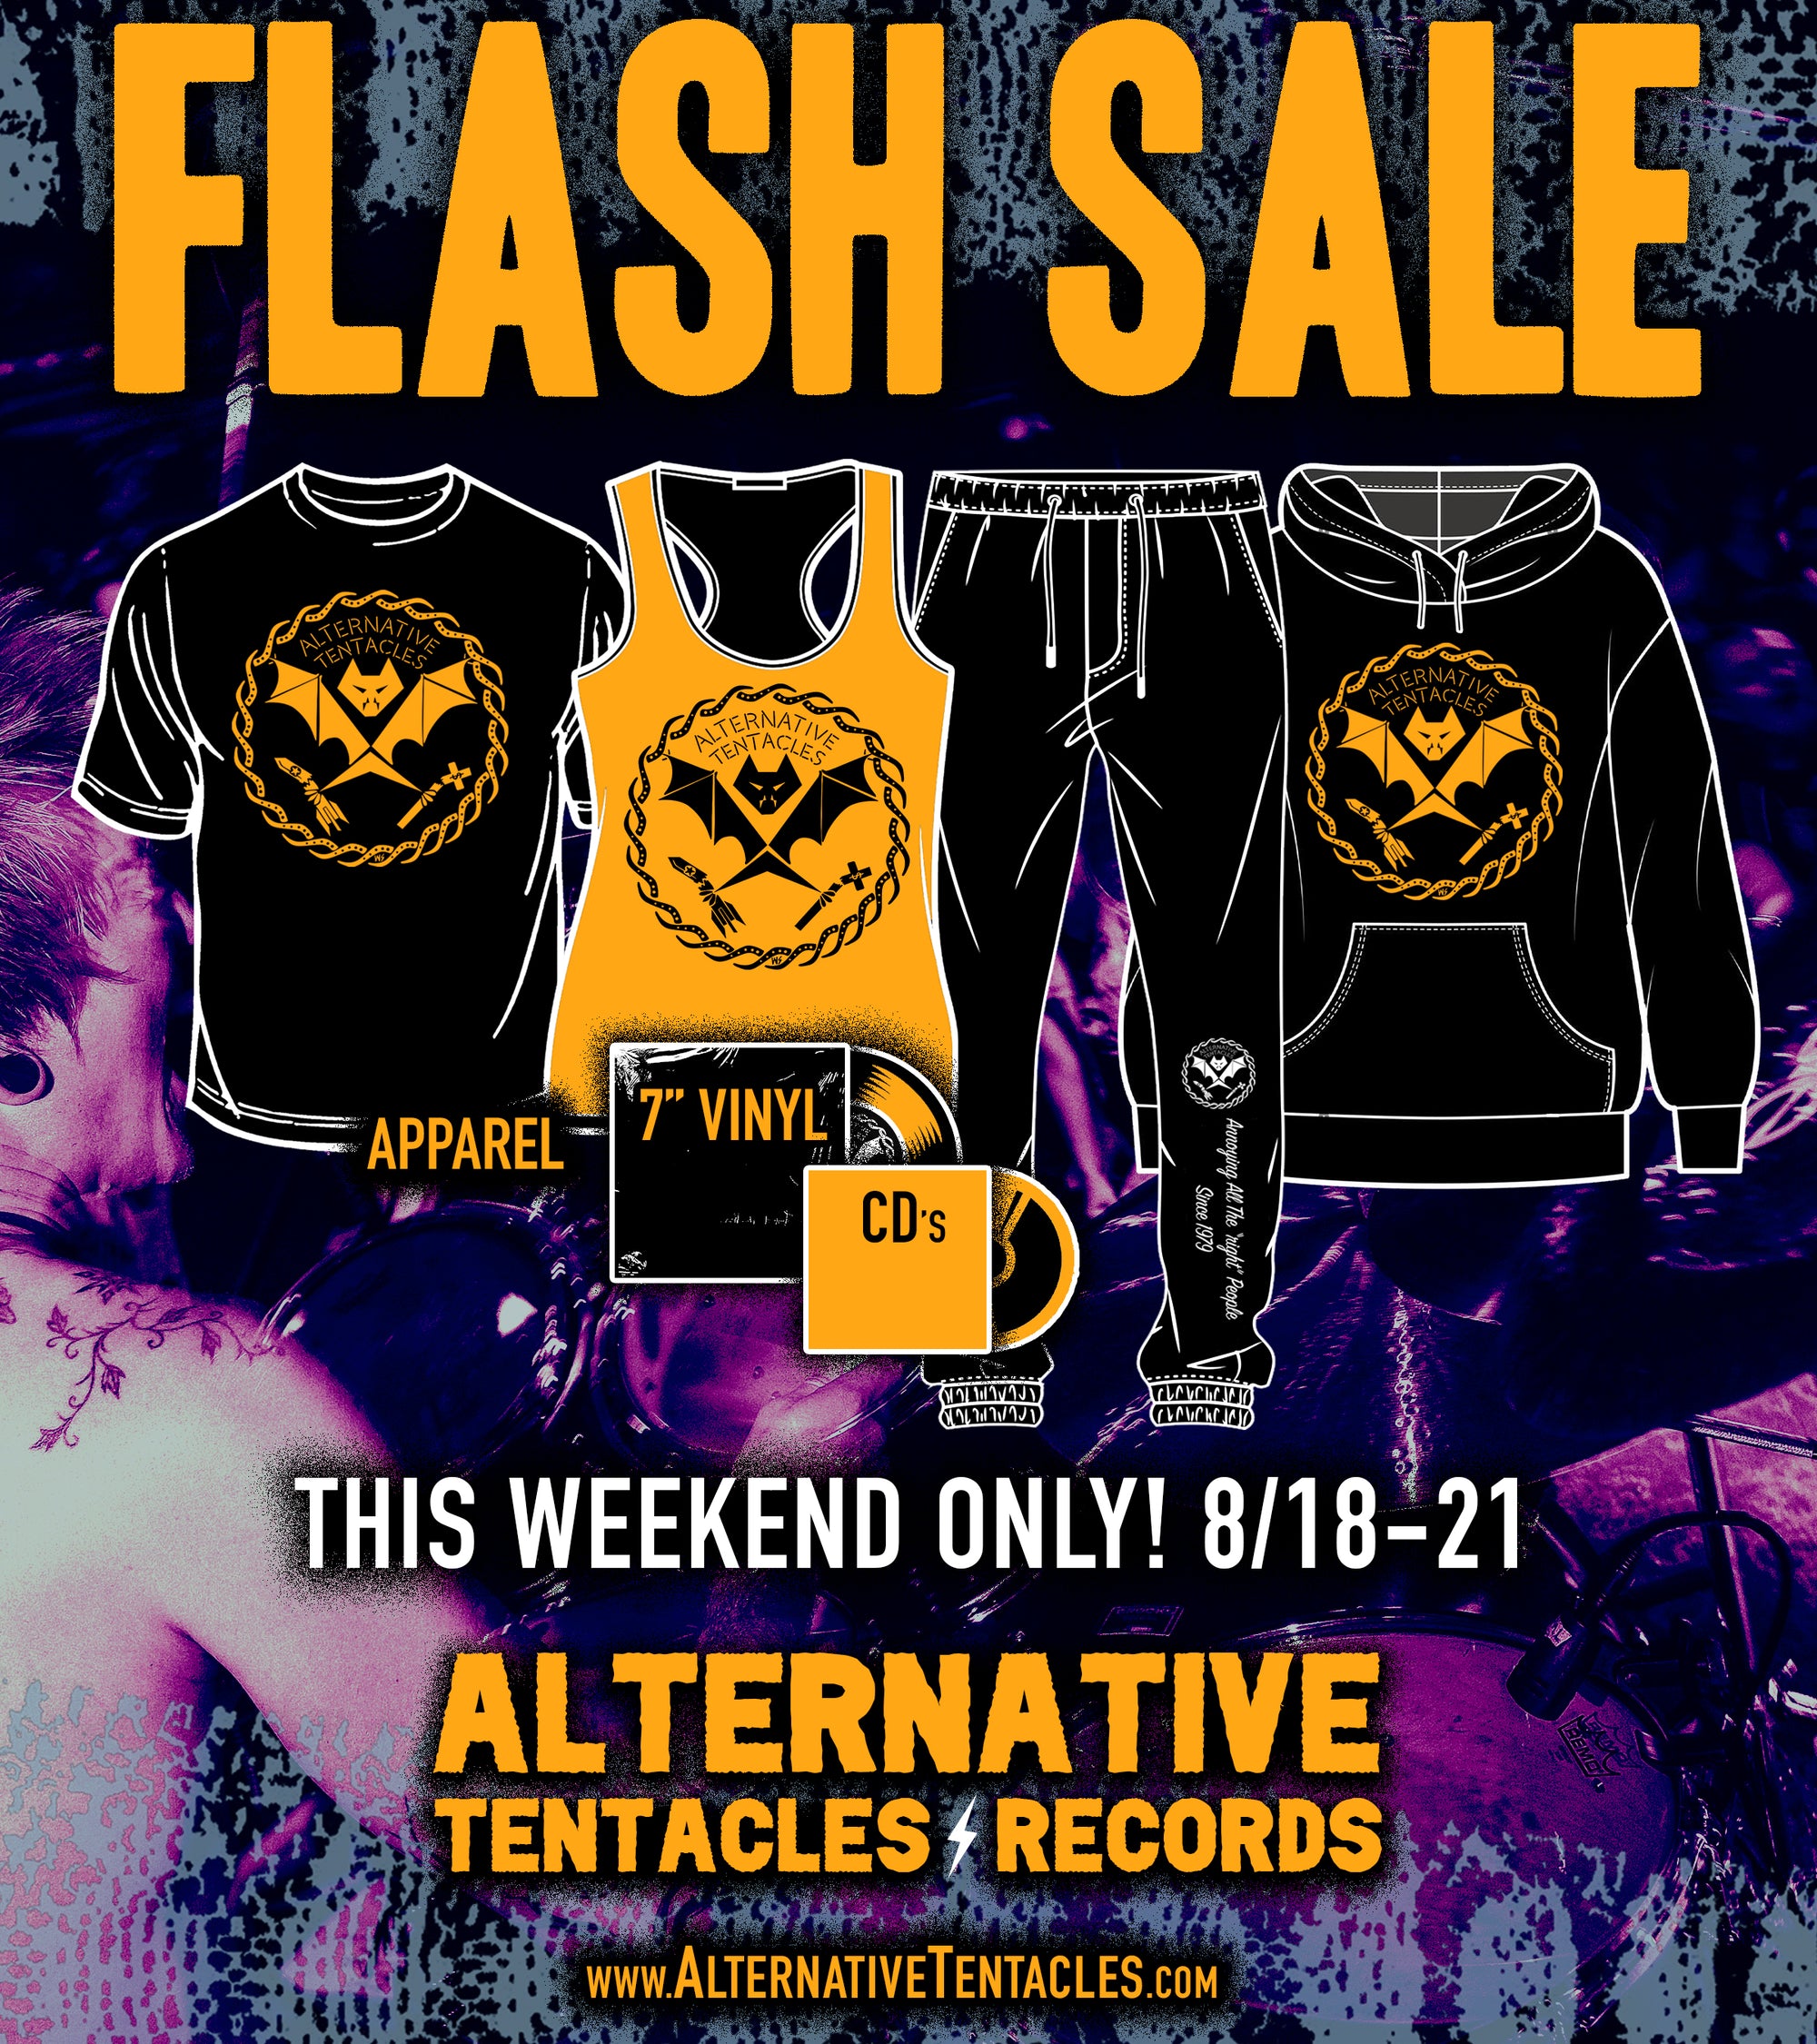 FLASH SALE! THIS WEEKEND ONLY!